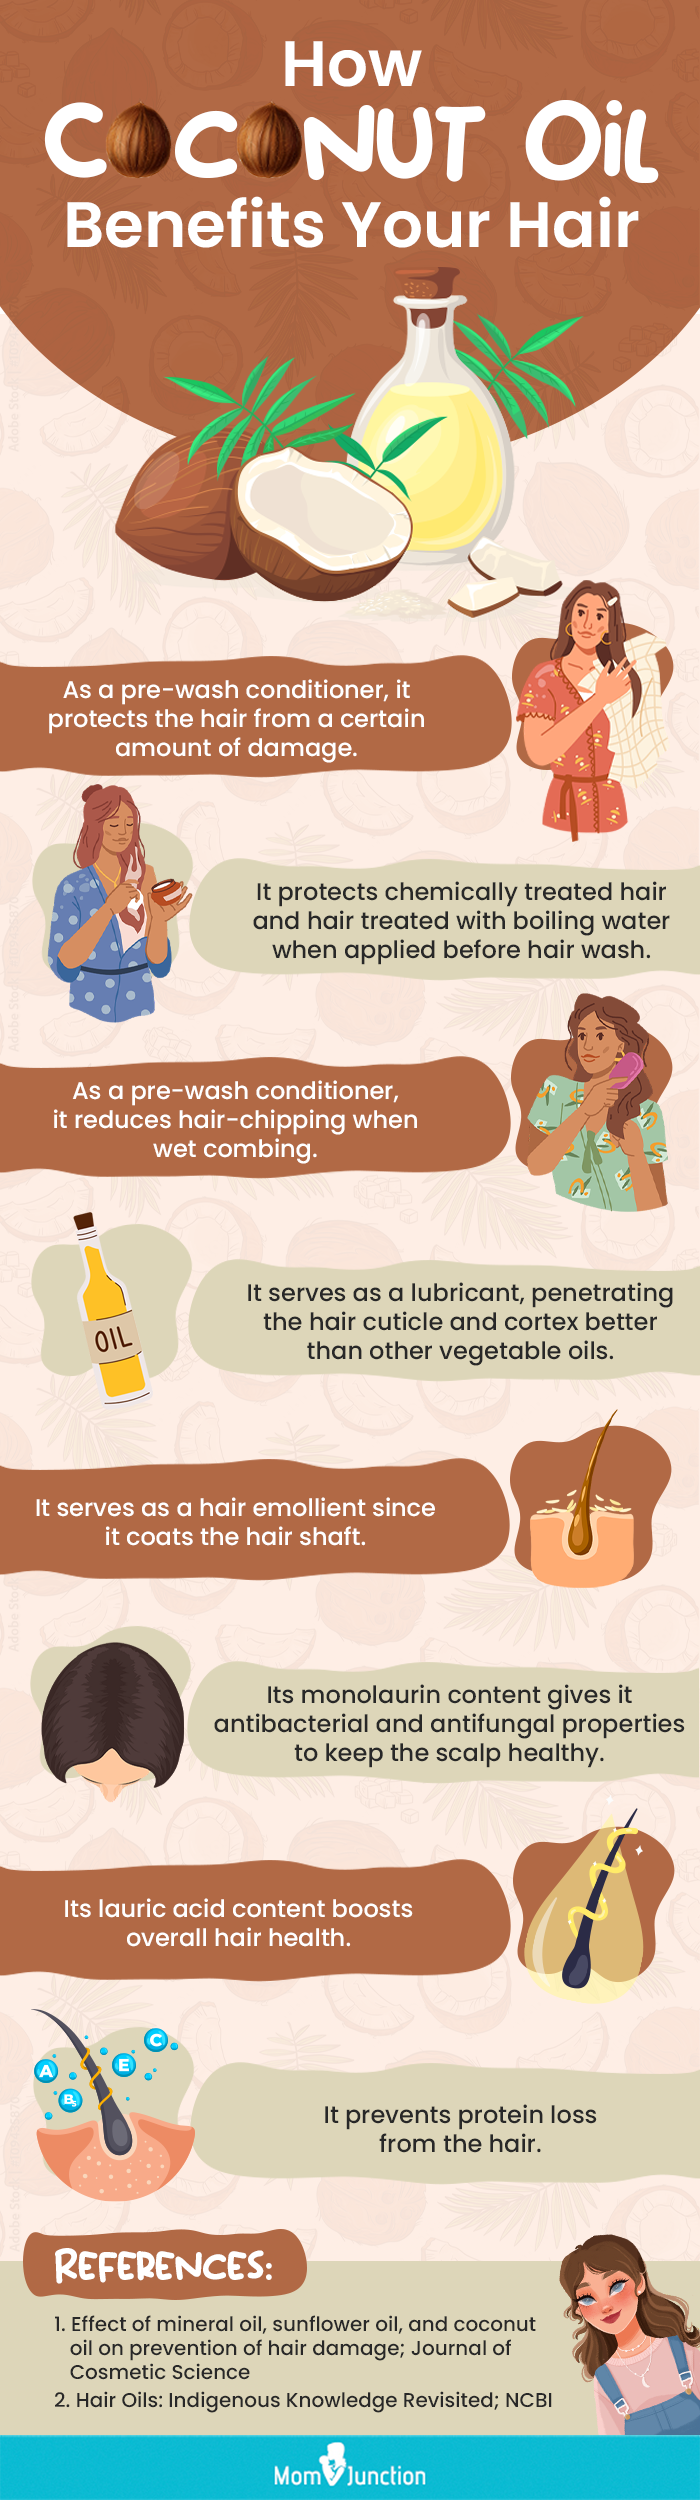 How Coconut Oil Benefits Your Hair